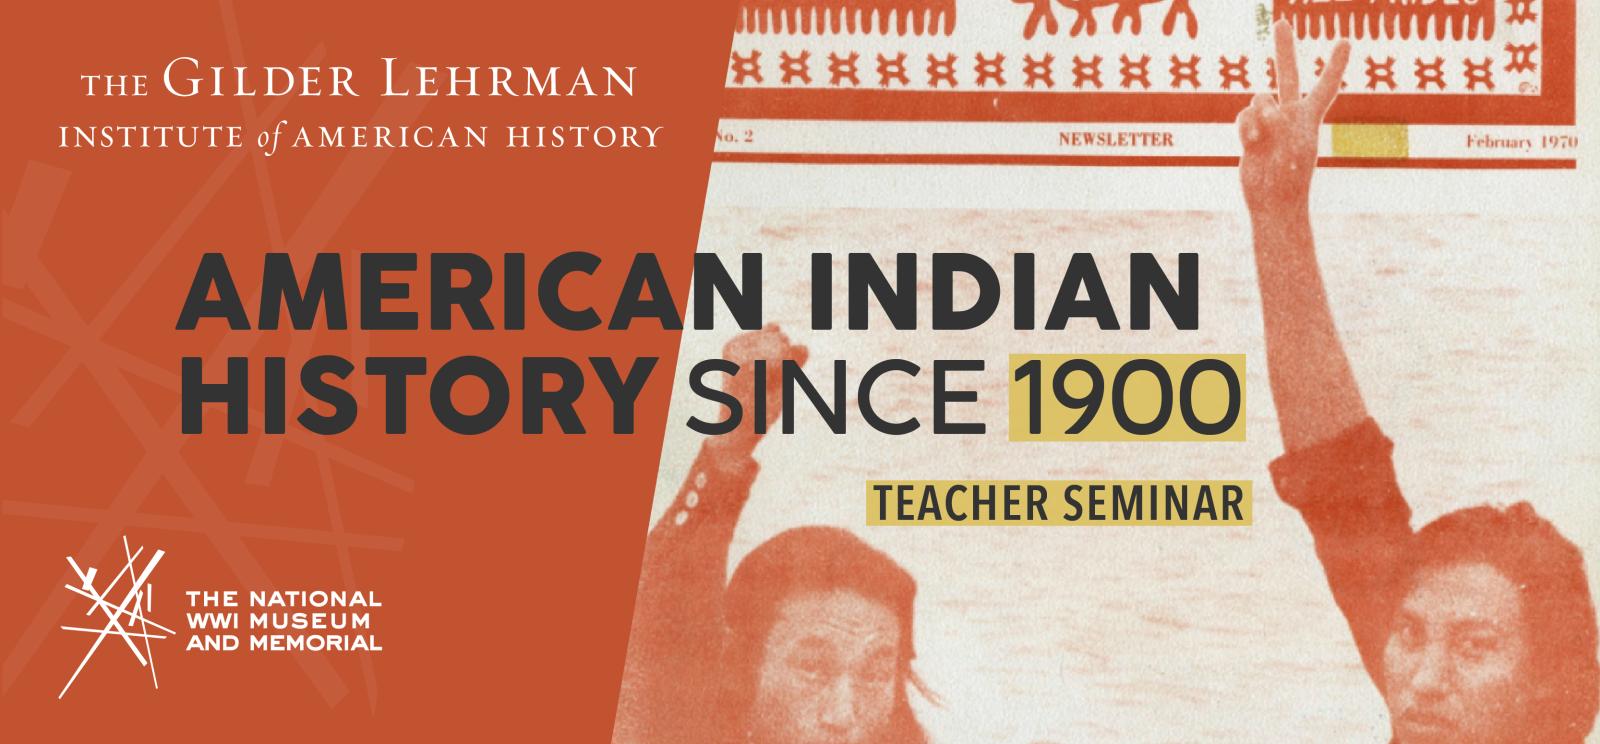 Image: Grainy photograph of two brown-skinned men turning to look at the camera. One has his fist raised while the other is making the peace or victory sign. Text: American Indian History since 1900 / Teacher Seminar